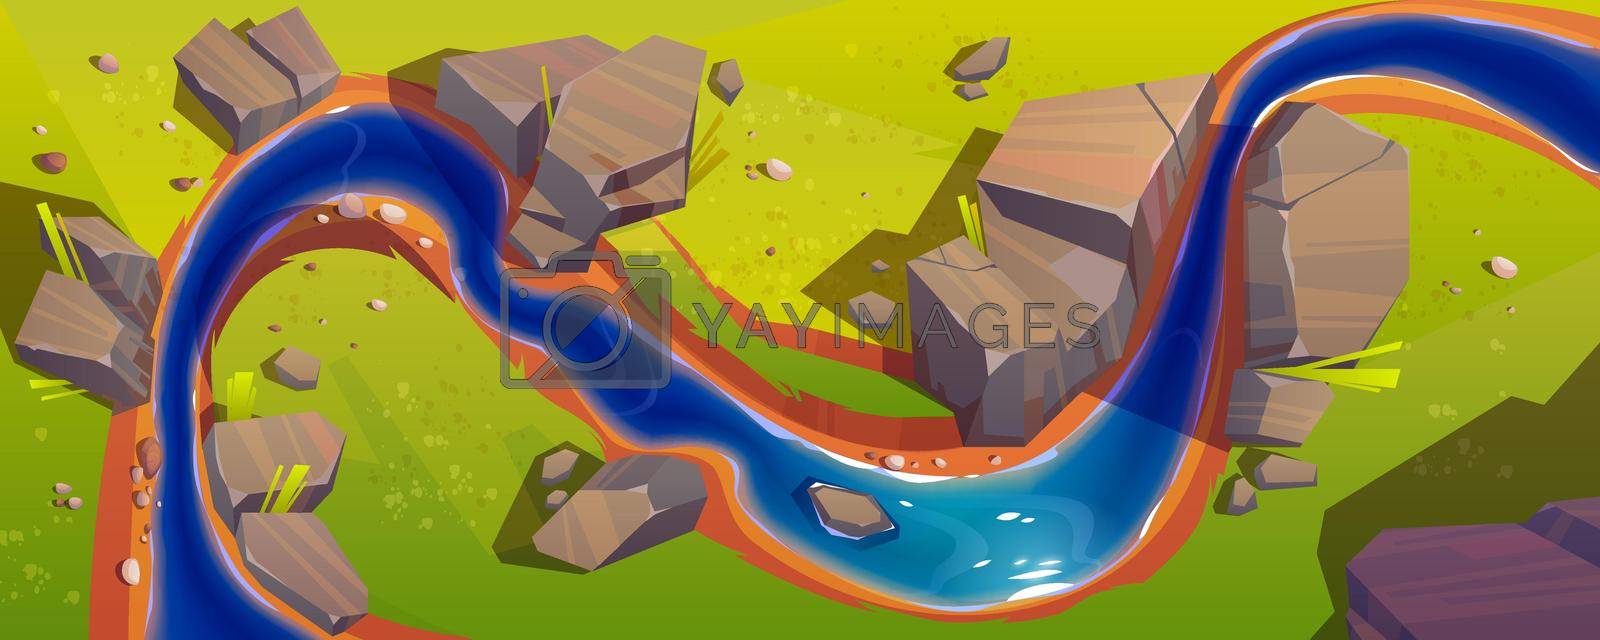 Flowing river top view. Vector background of nature landscape with blue water stream, green grass and rocks. Illustration of summer scene with brook flow on field with stones